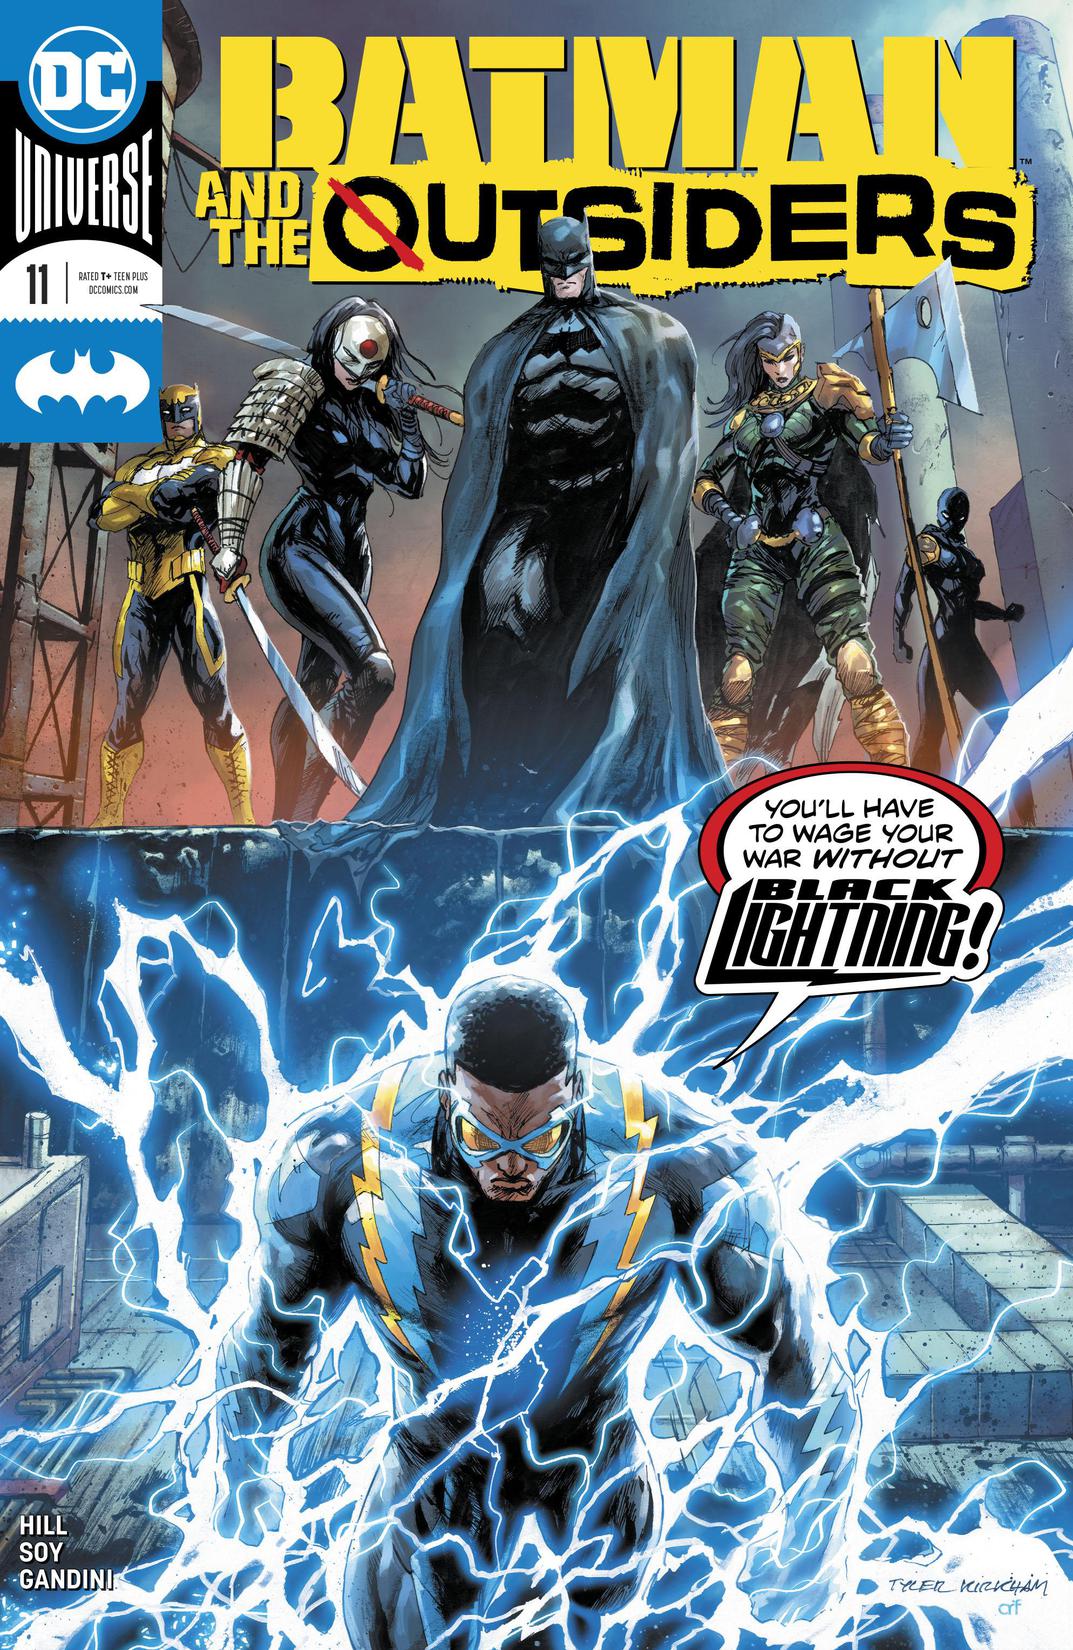 Batman & the Outsiders (2019-) #11 preview images